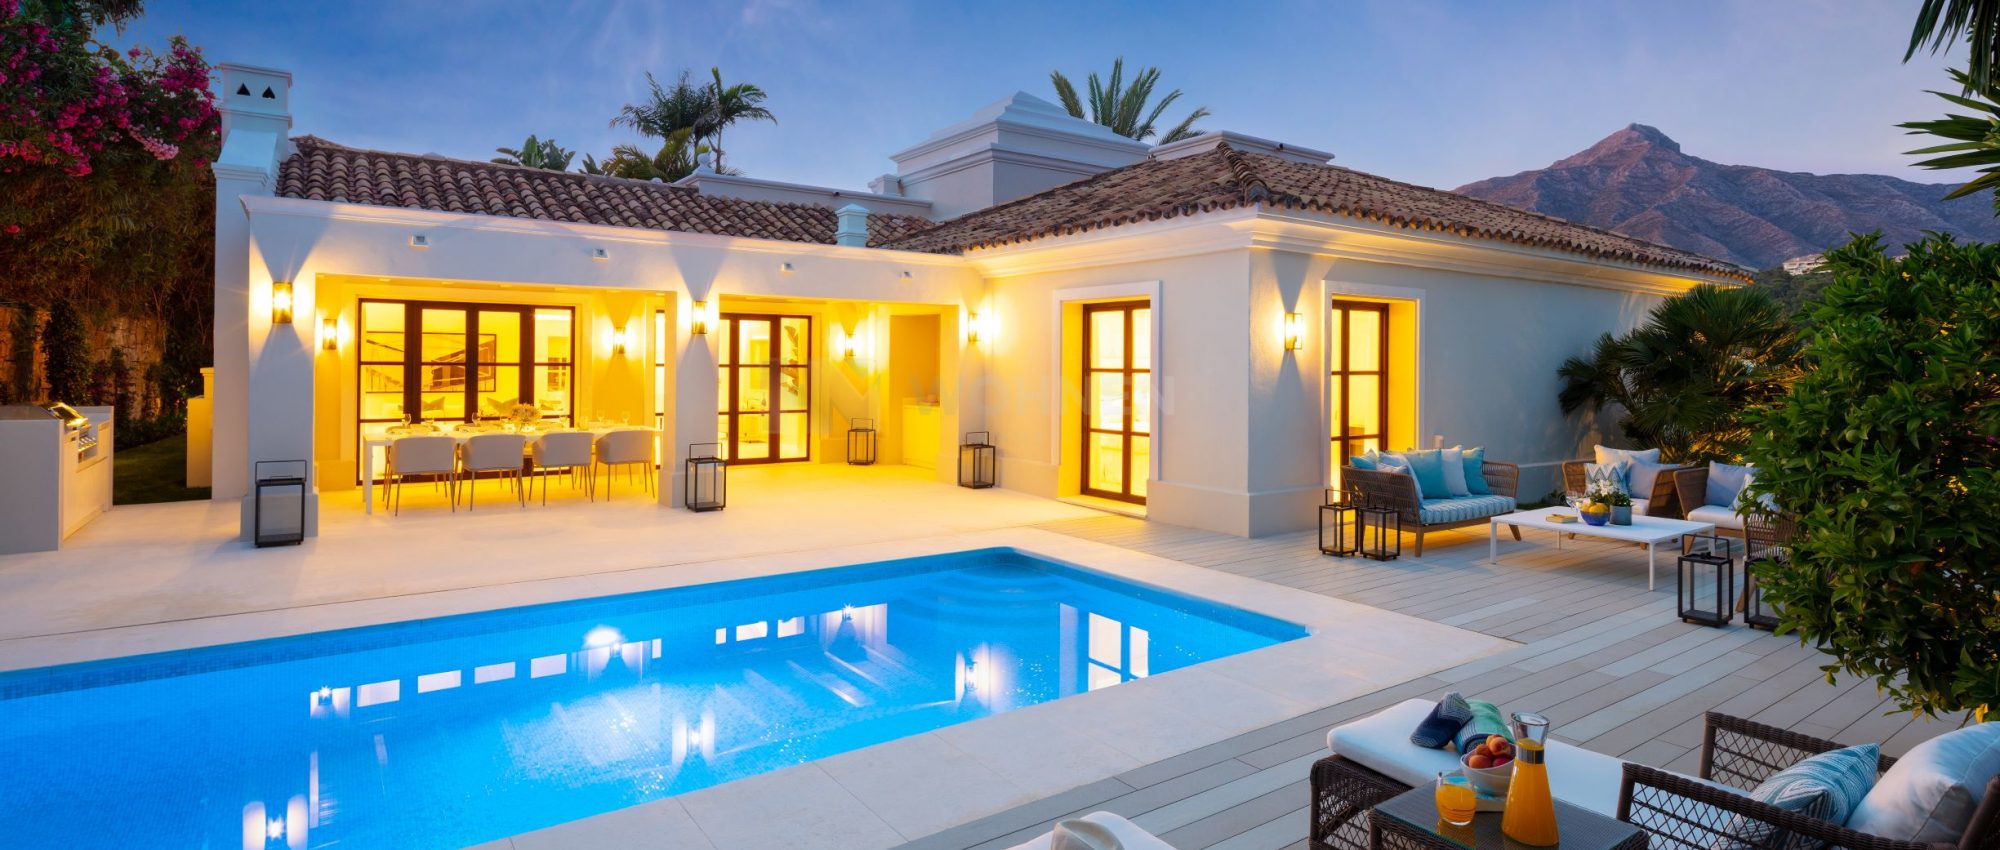 Stunning refurbished, quality and modern villa in Nueva Andalucia, Marbella